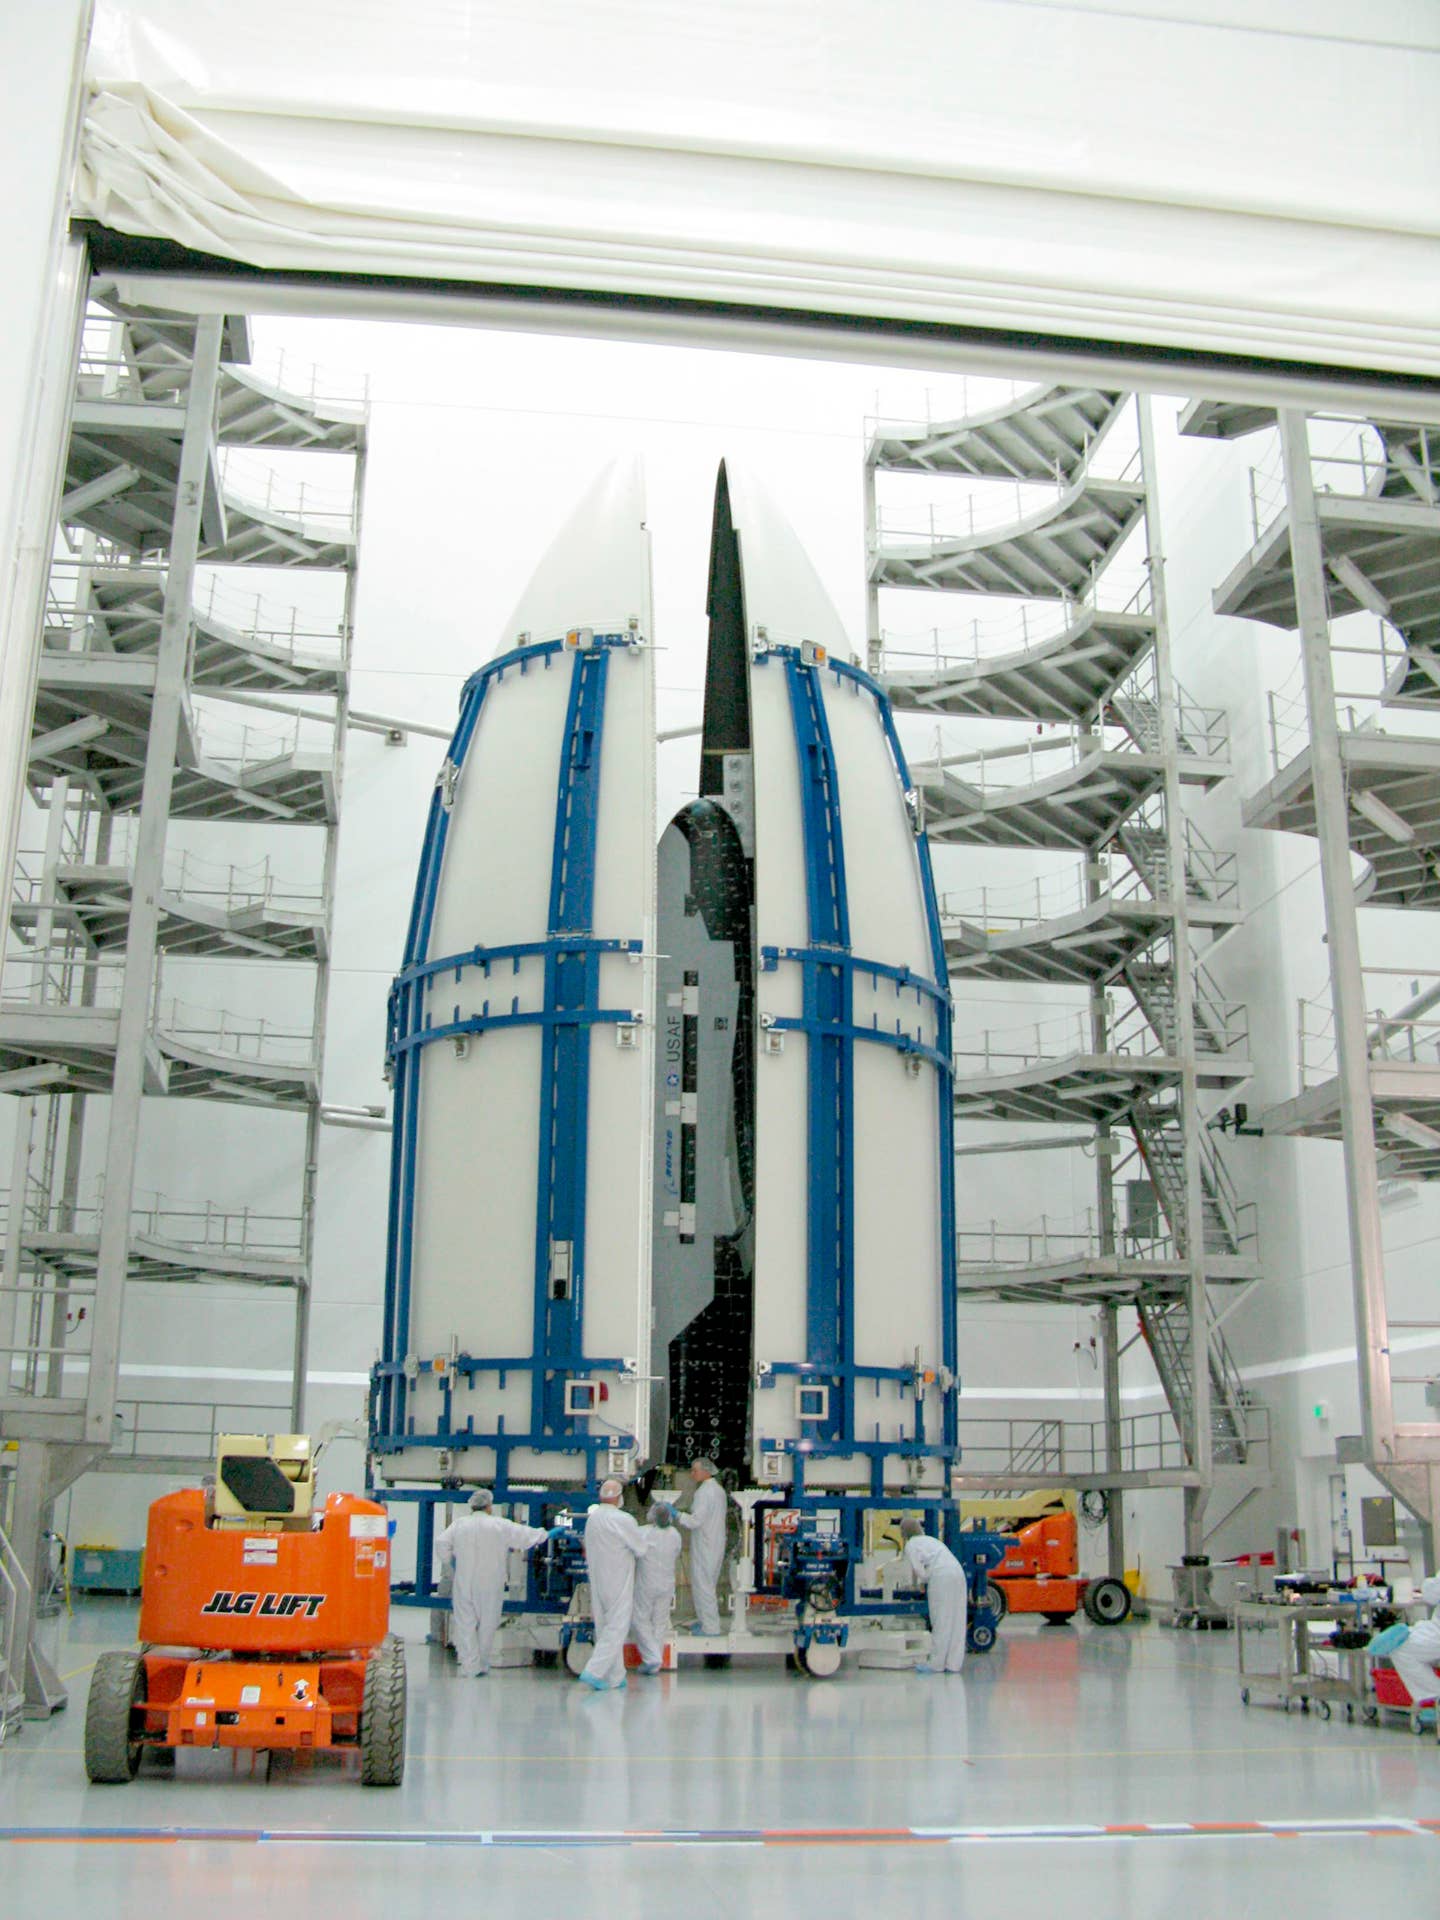 The X-37B during encapsulation within the United Launch Alliance Atlas V fairing, on February 8, 2011, at Astrotech in Titusville, Florida. <em>Photo by DoD/Corbis via Getty Images</em>